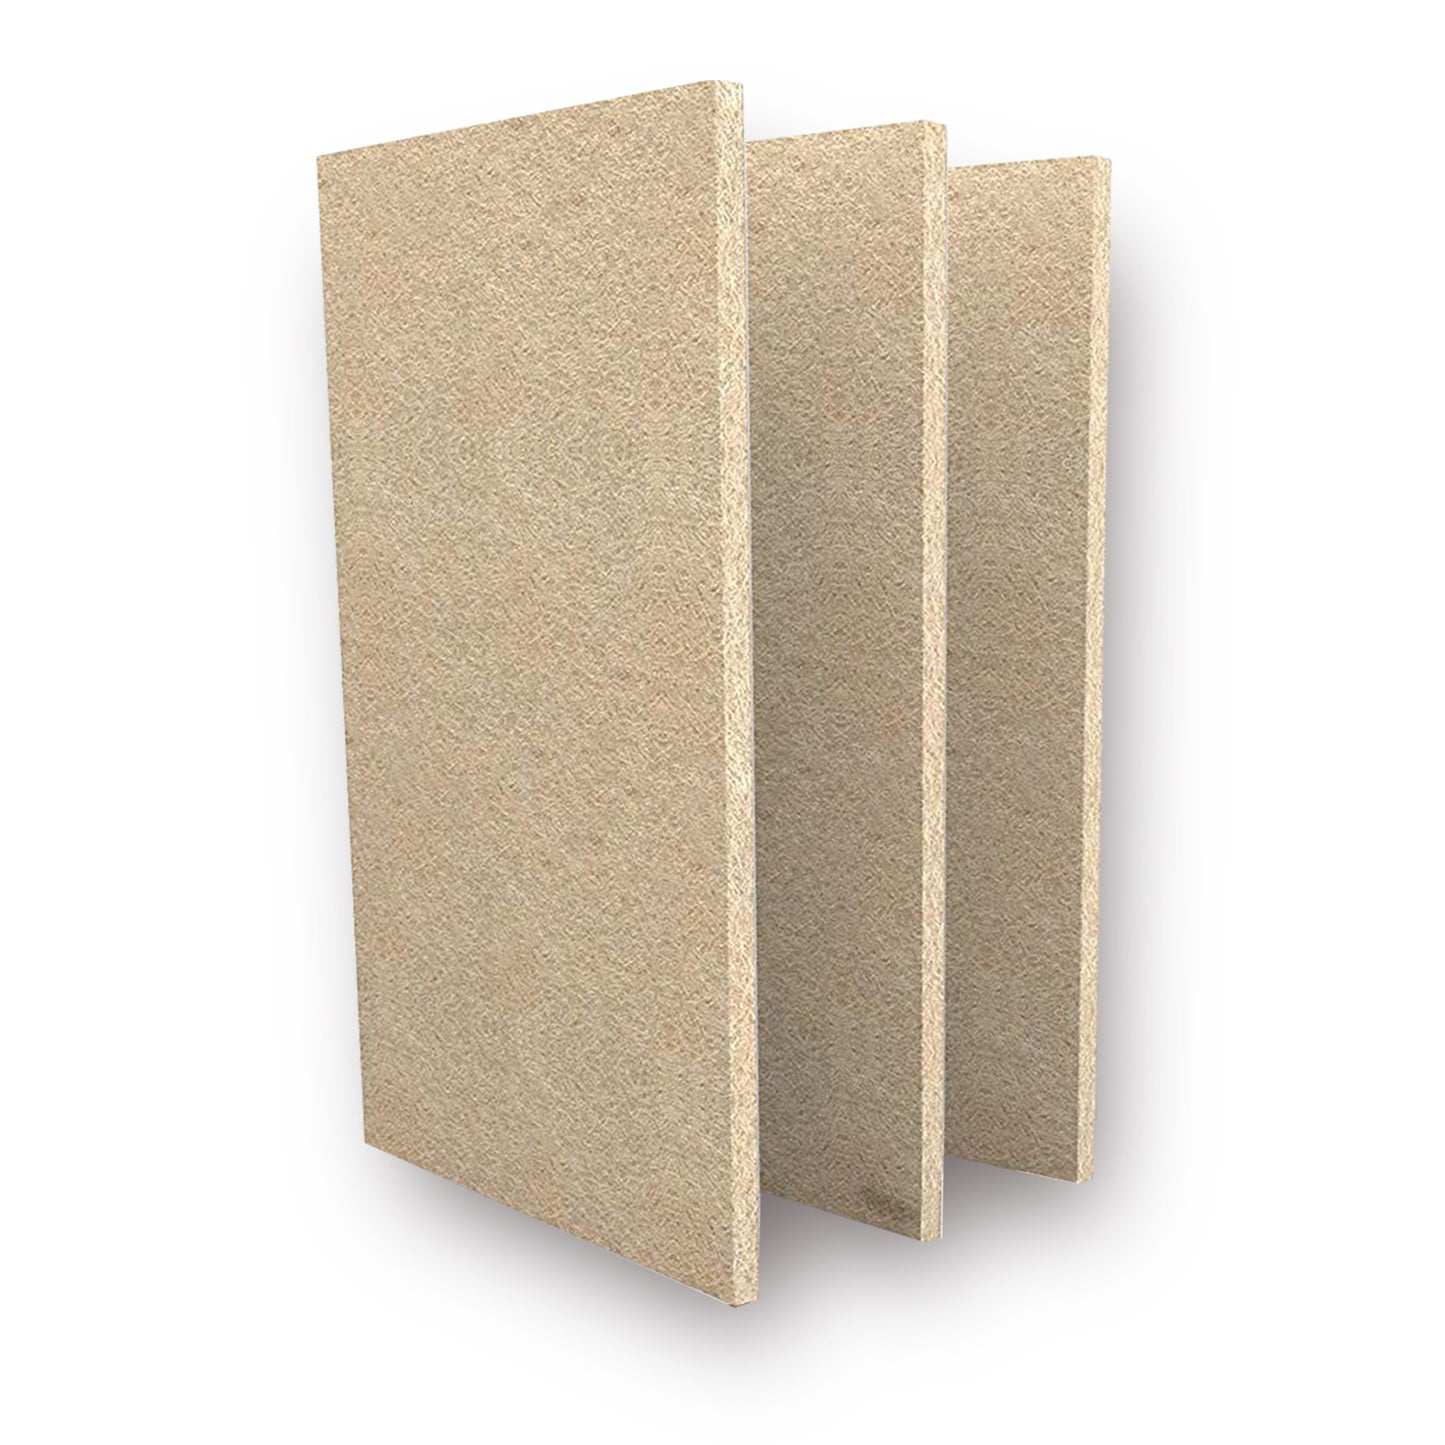 Chair Leg Floor Protectors Furniture Felt Pads Beige and Brown Extra Large Sheets 30 x 21 cm Hardwood Floor Protector 5mm thick